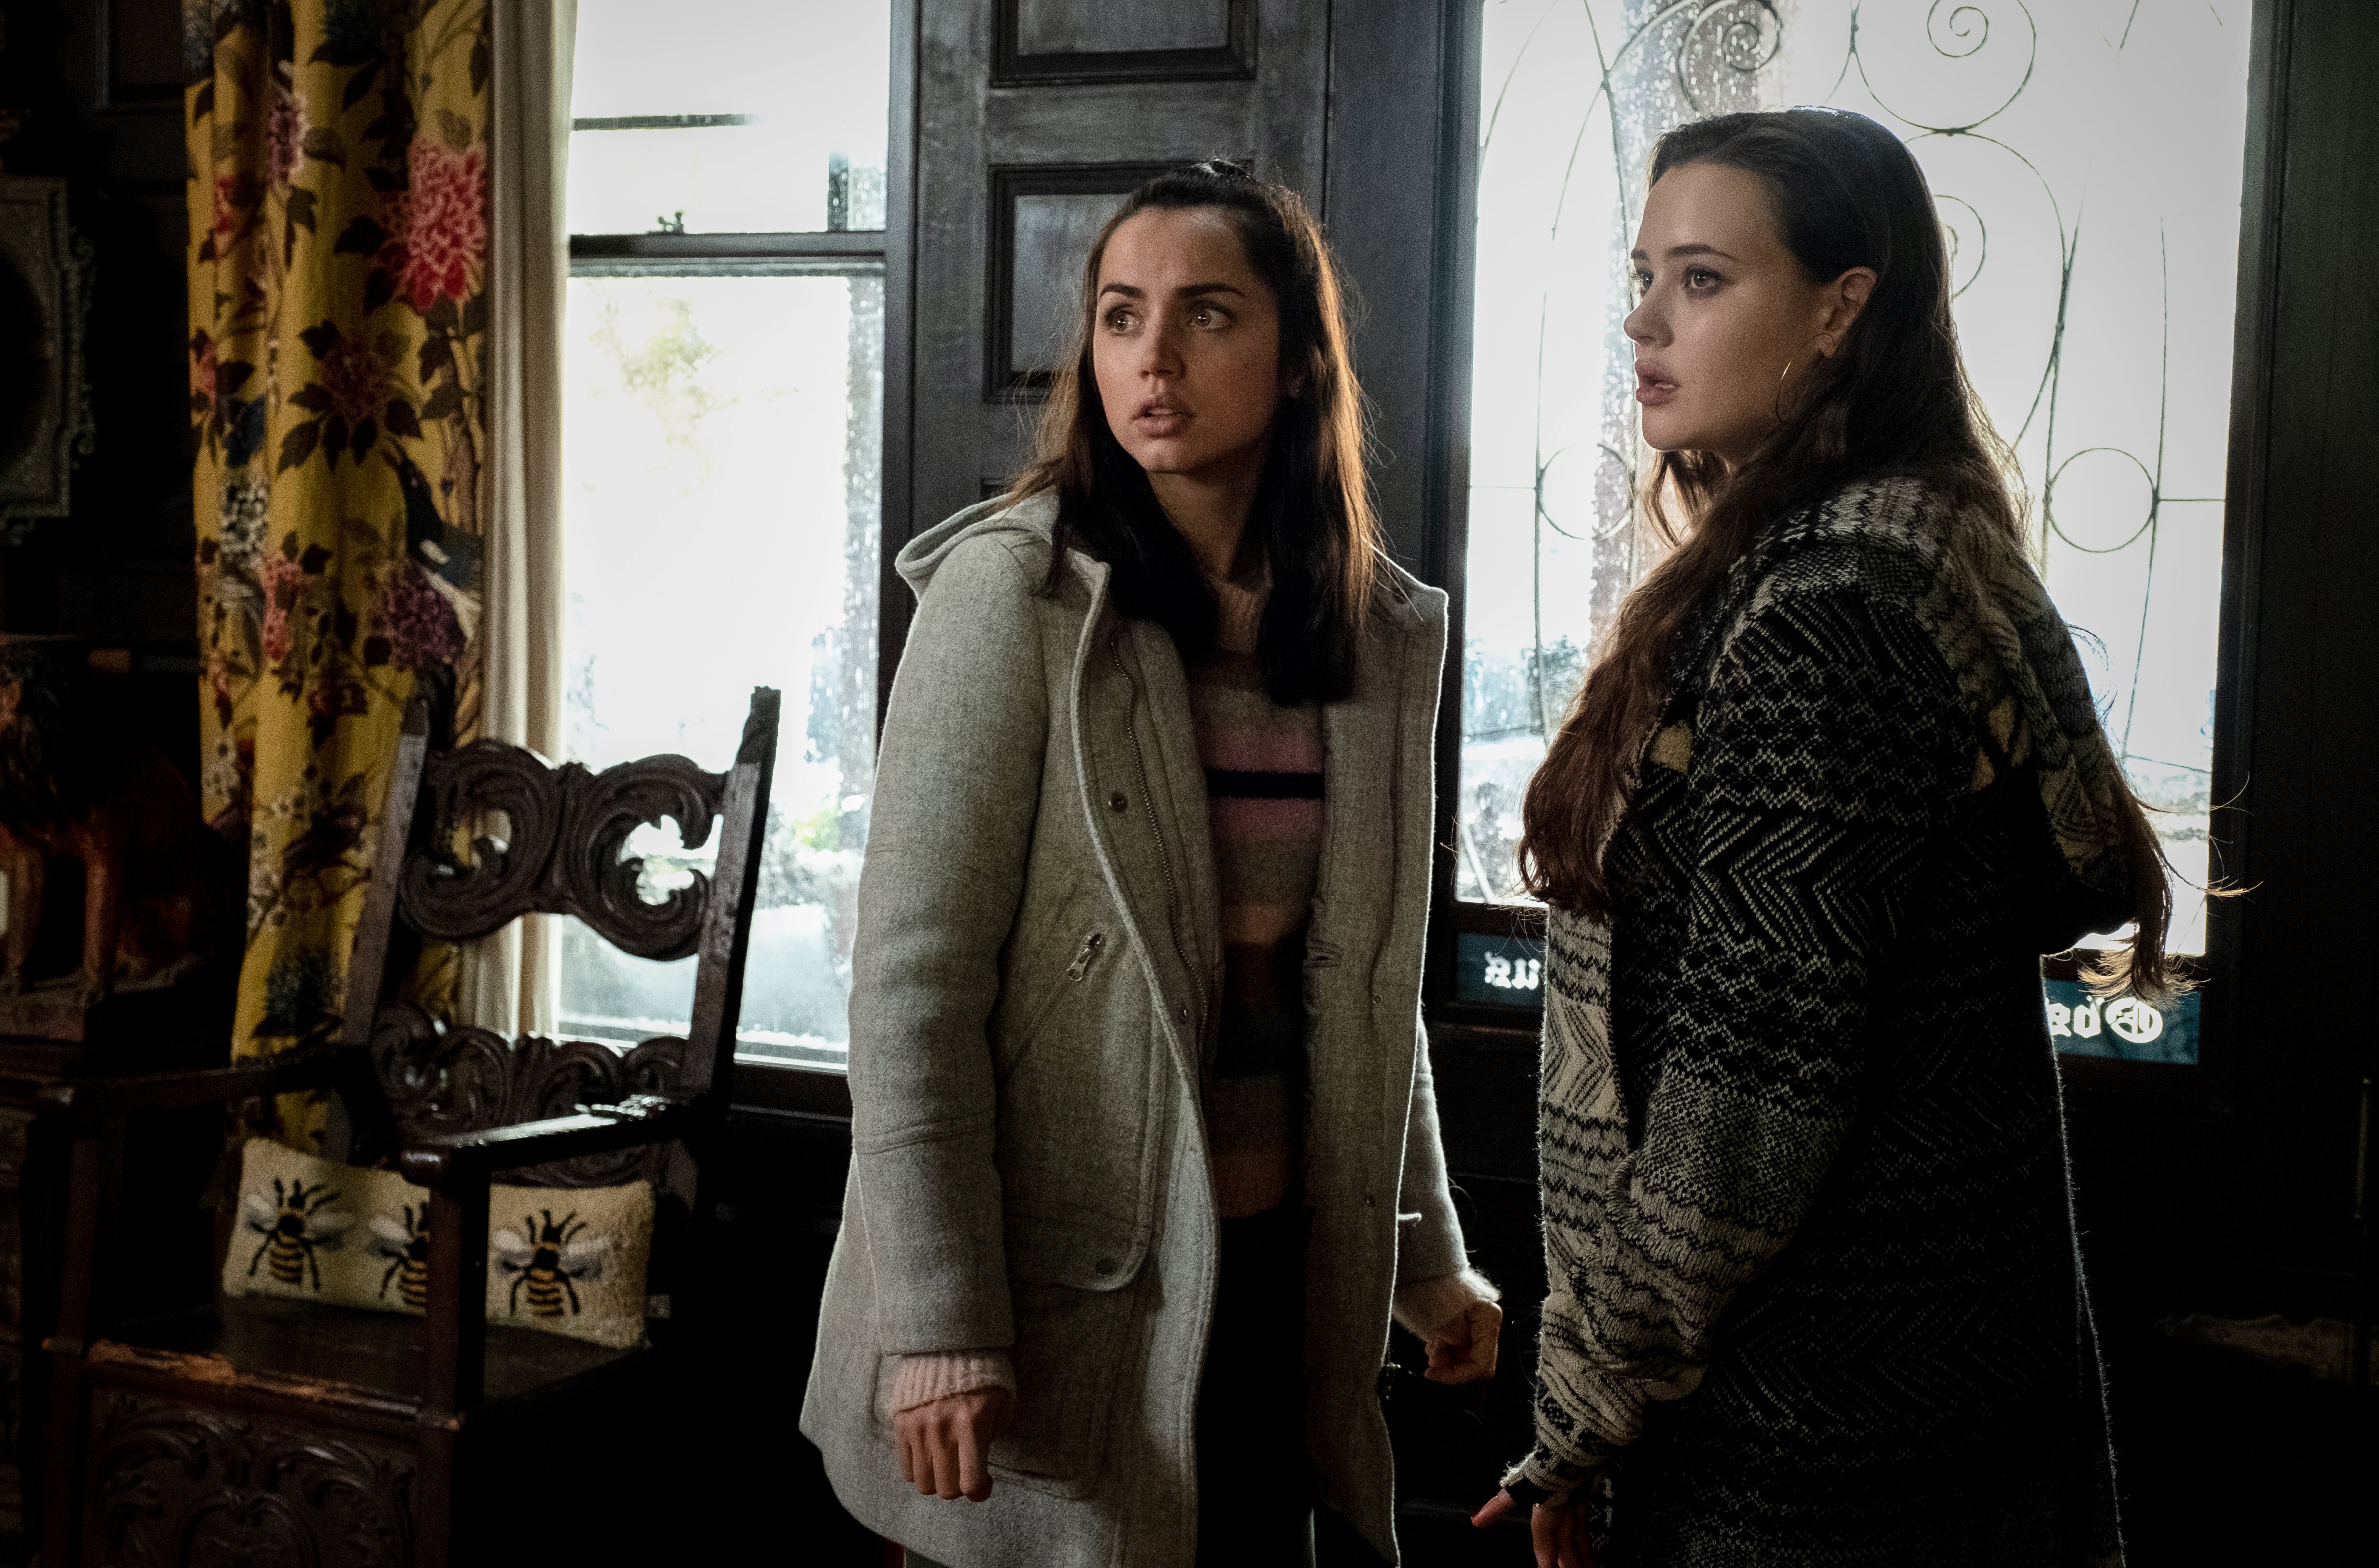 Ana de Armas, left, with Katherine Langford in "Knives Out." (Claire Folger&amp;MRC)